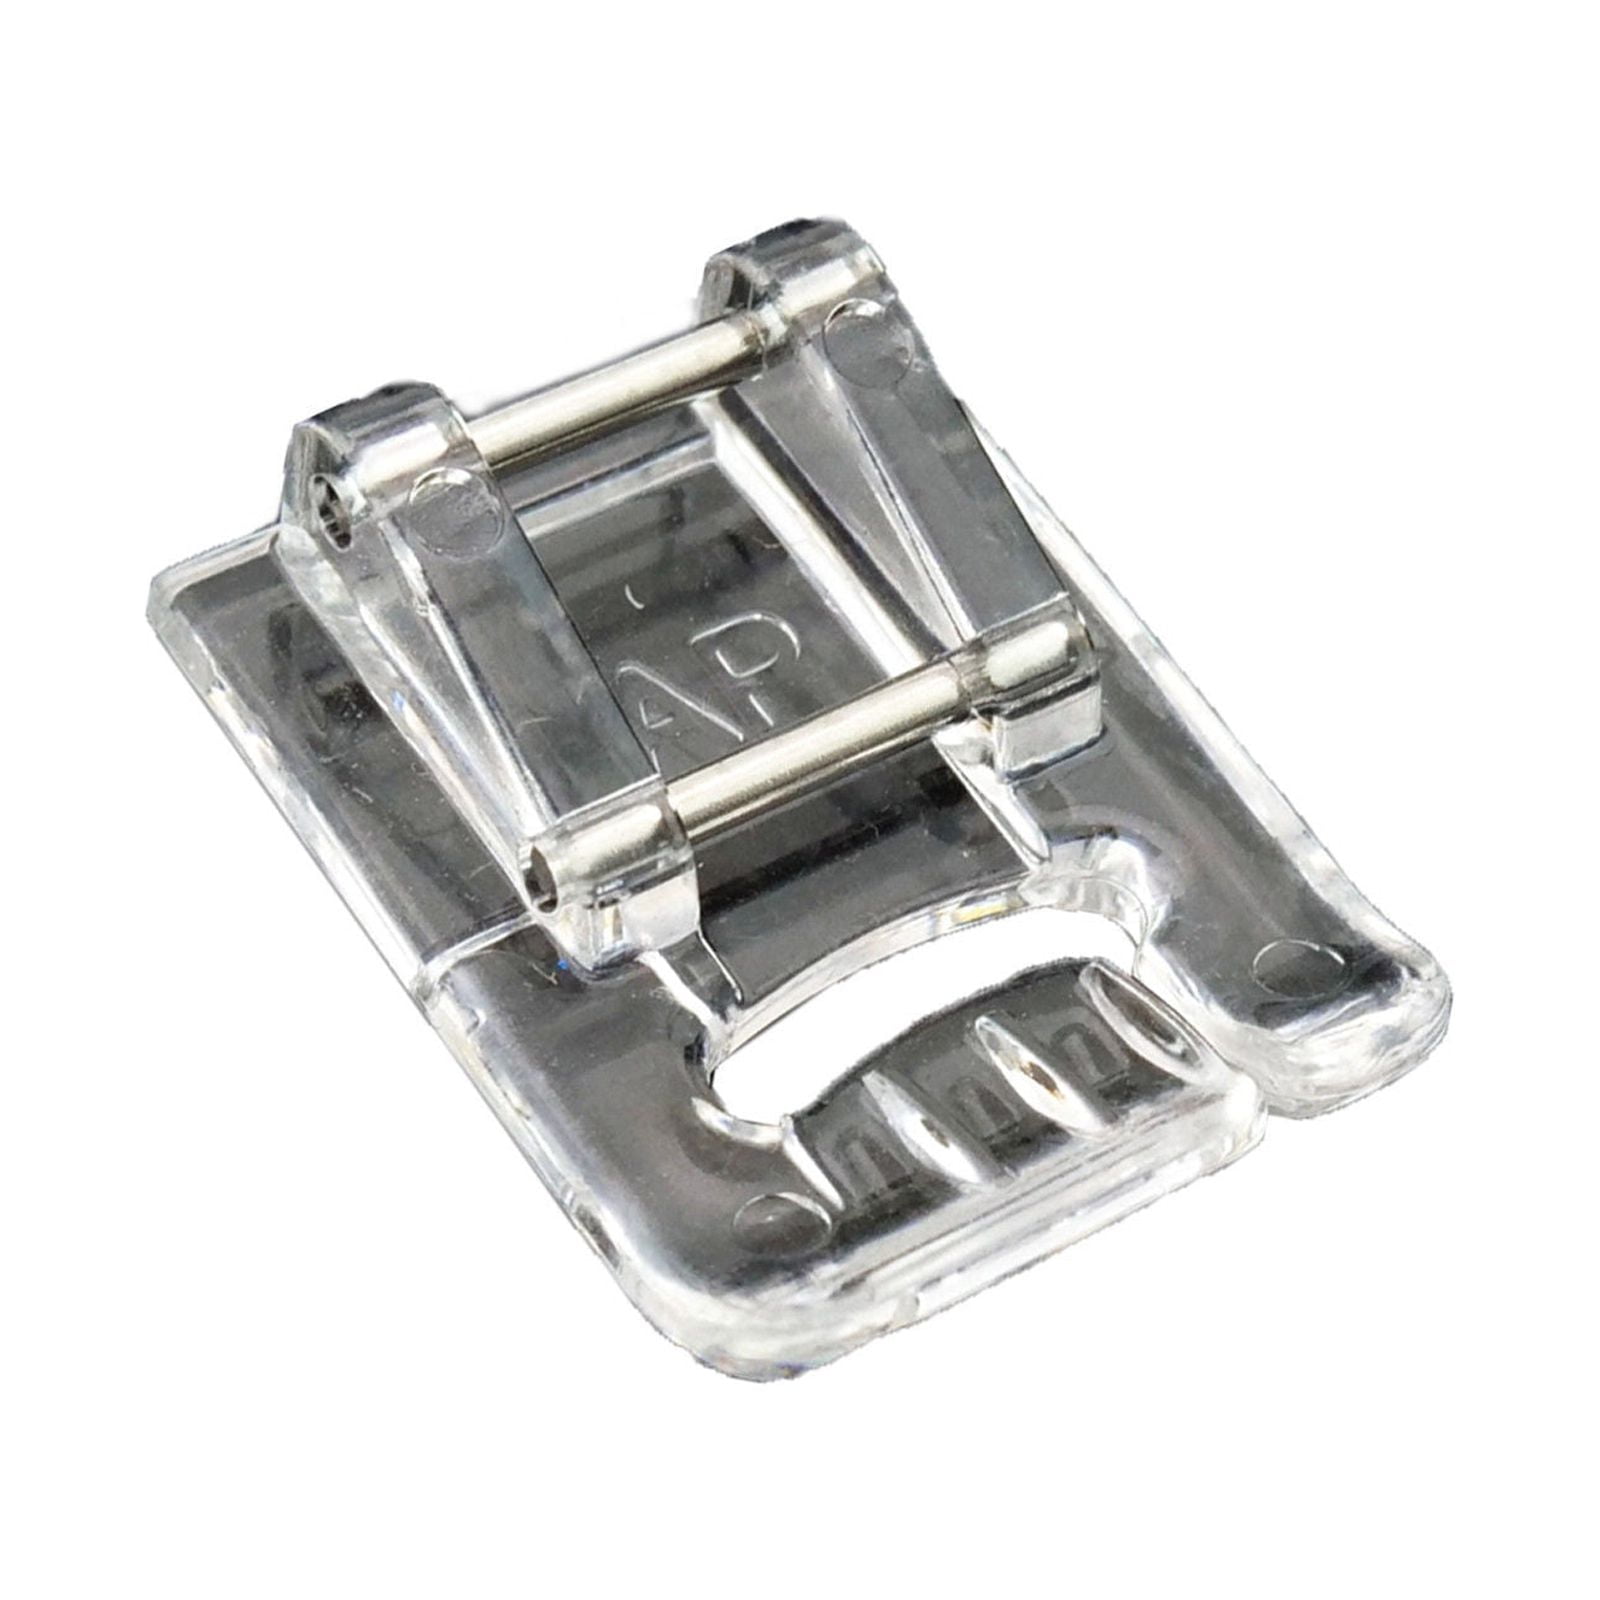 11 Pcs Sewing Machine Presser Feet SetMultifunction Presser Foot Parts Accessories for Brother, Babylock, Singer, Janome, Kenmore (11-Pack), Size